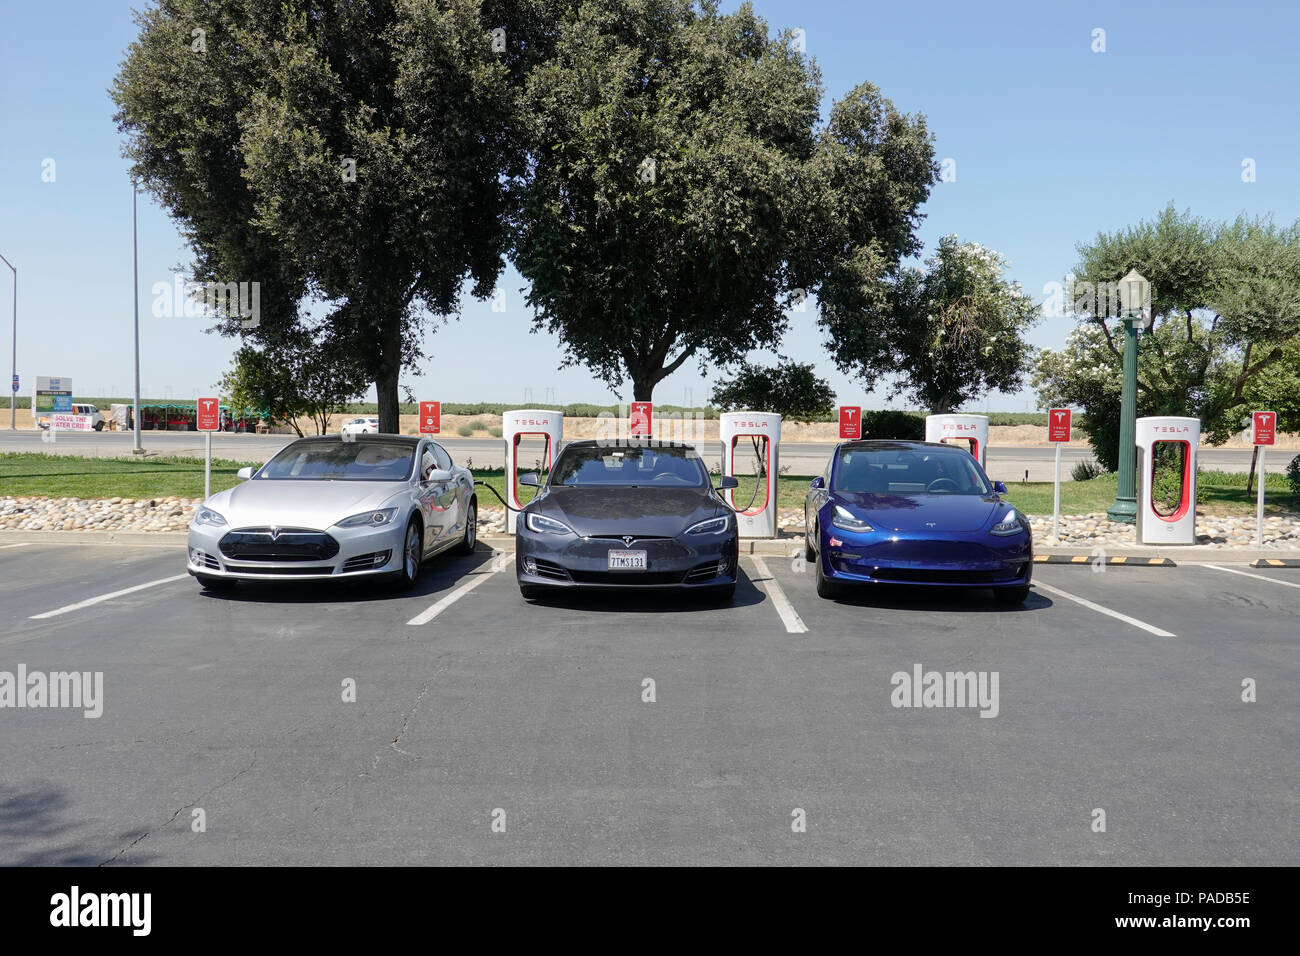 Tesla Supercharging Stations at Harris Ranch, a popular stop over on Interstate 5 in California's Central Valley. Stock Photo